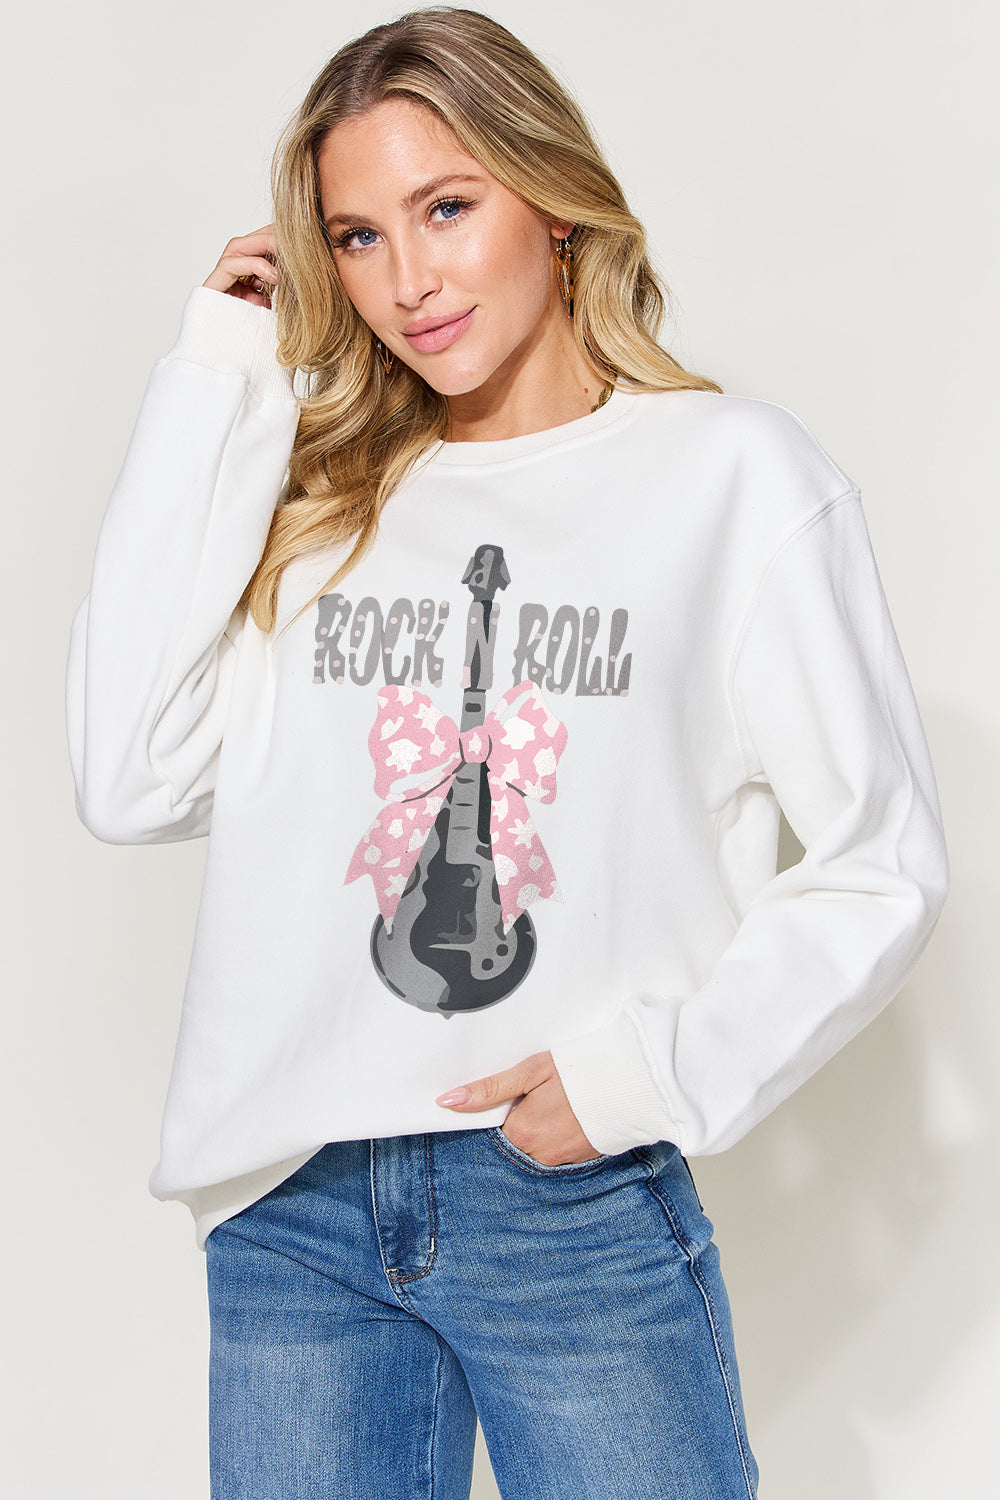 Simply Love Full Size Rock N Roll Guitar With a Bow Graphic Long Sleeve Sweatshirt